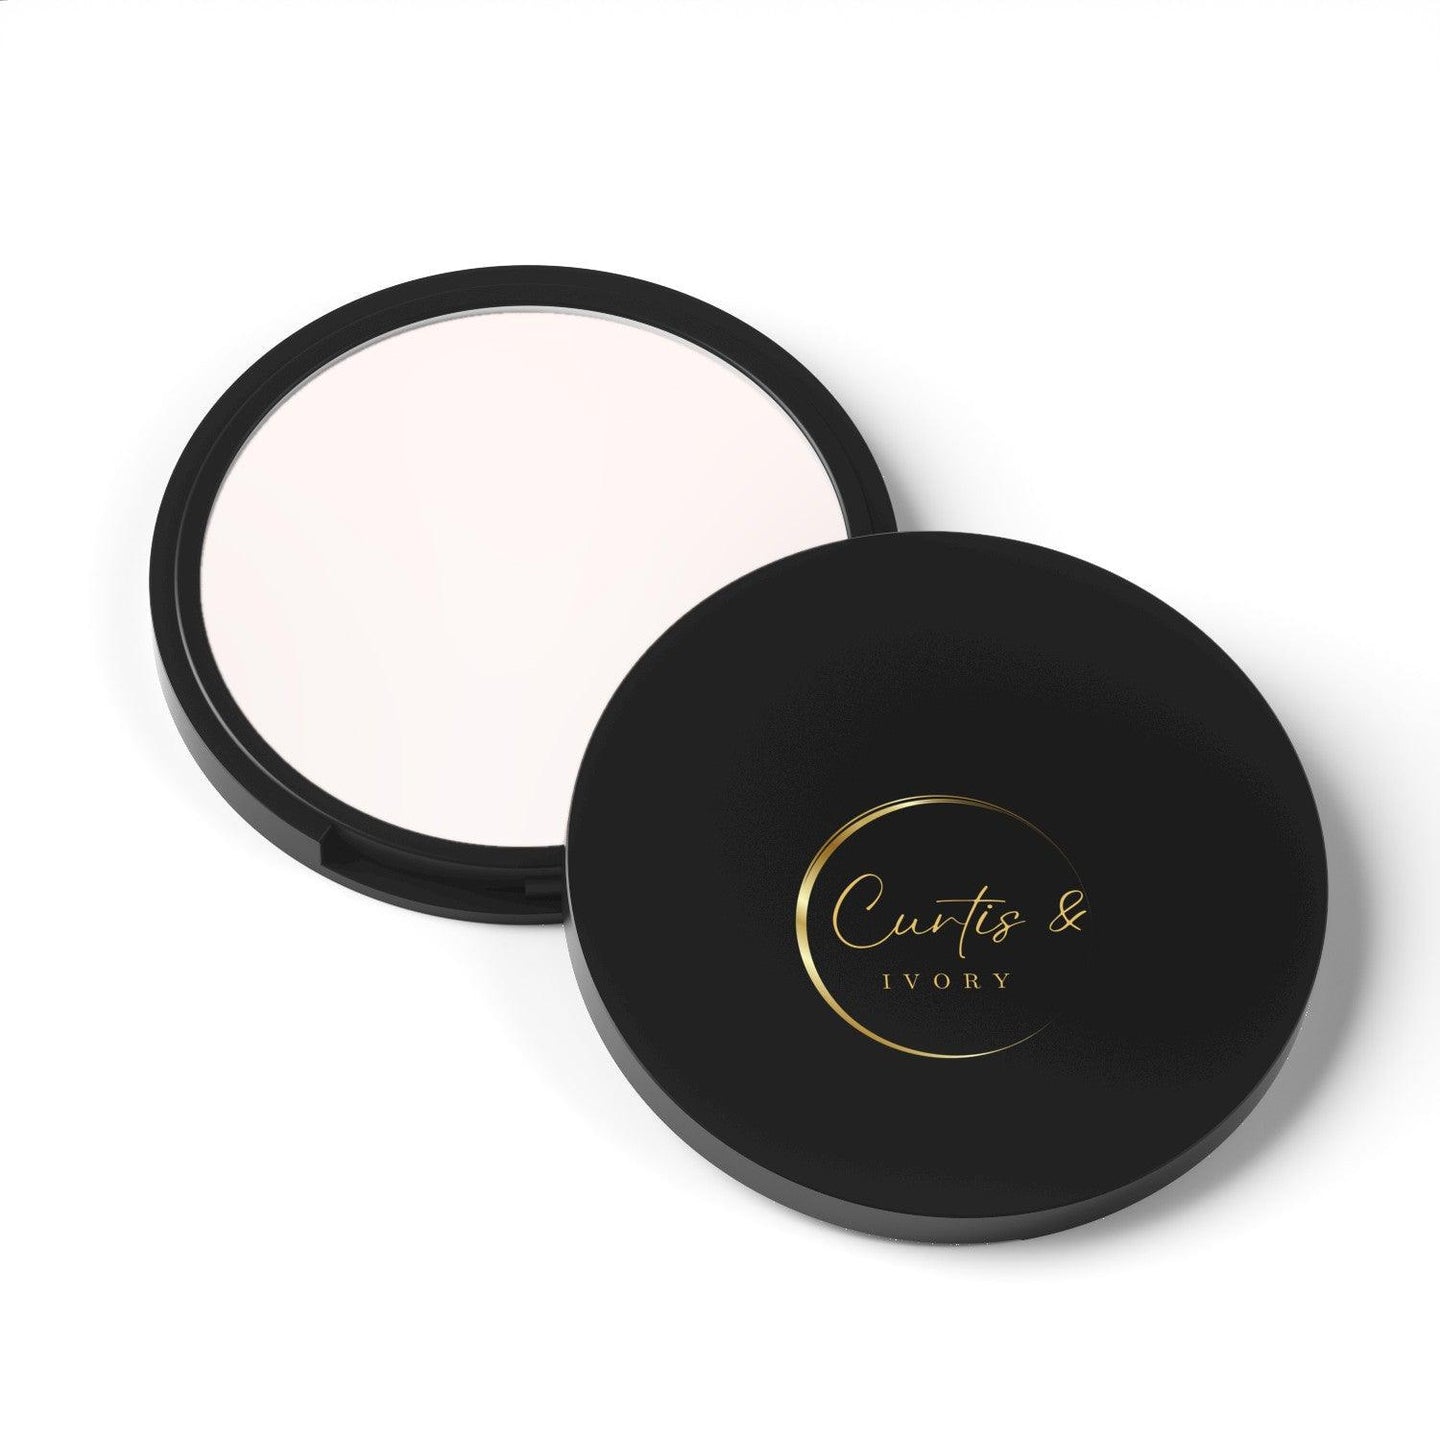 C & I Highlighters hydrates the skin while improves skin brightness, radiance, and texture, leaving the skin with a luminous, sensual glow - Curtis & Ivory